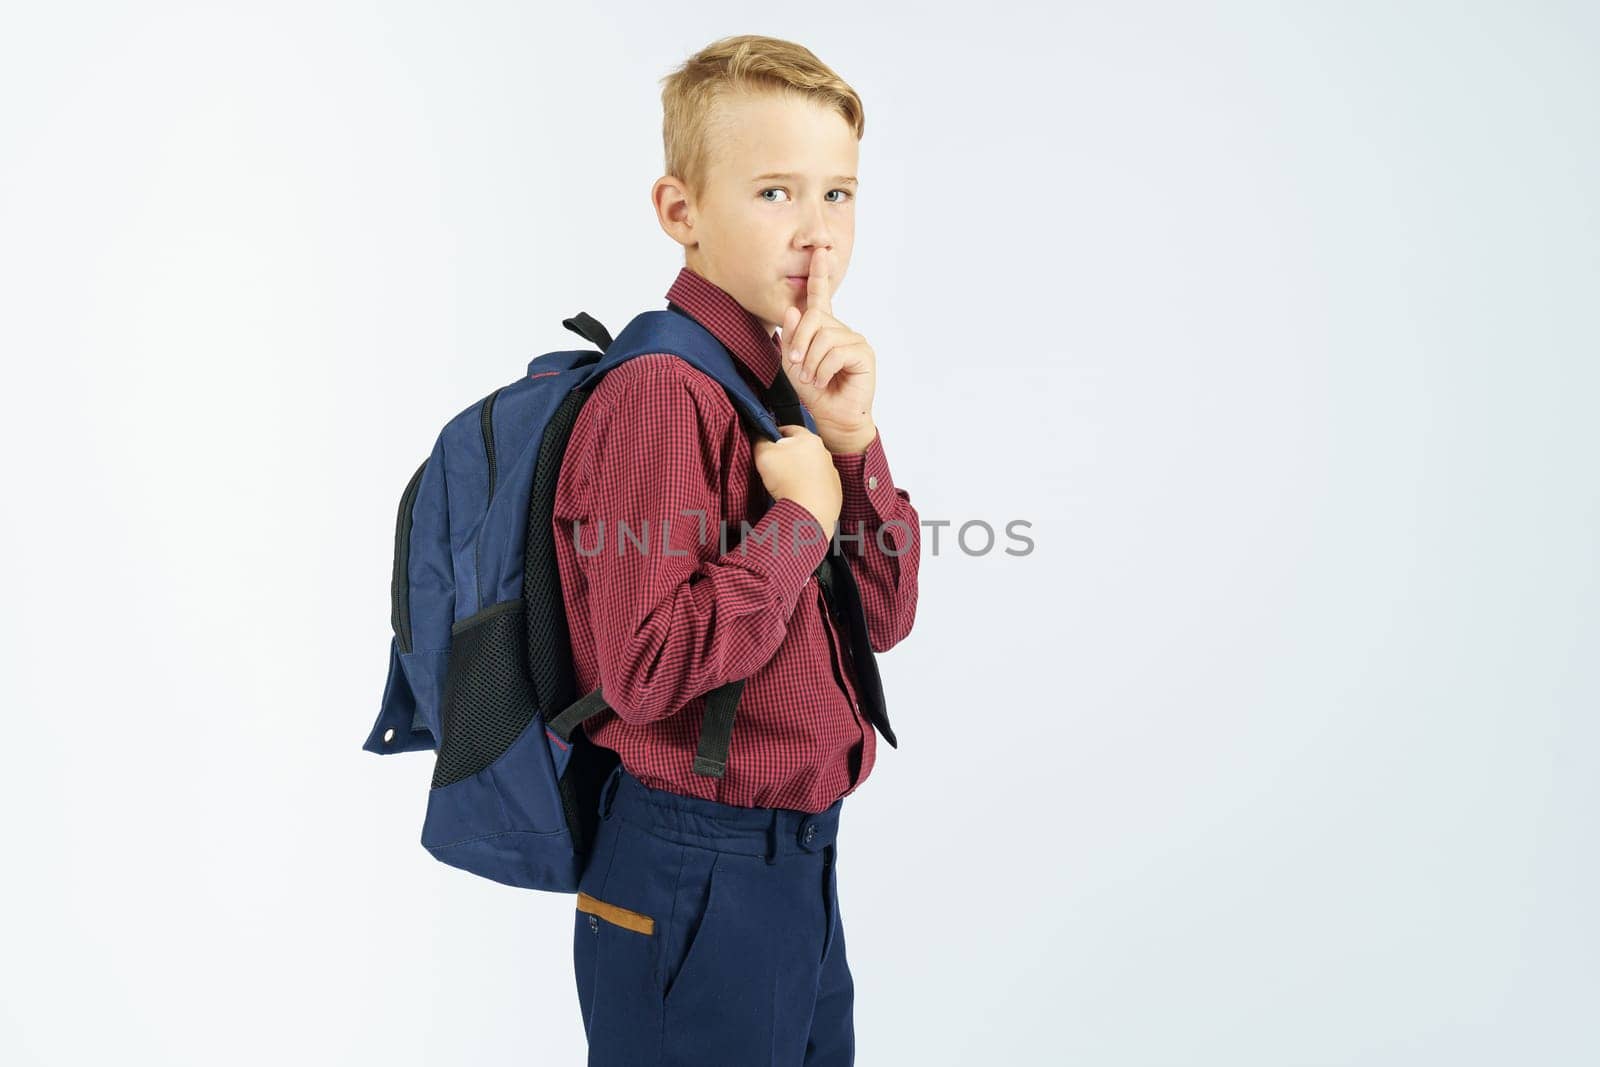 A schoolboy holds a school backpack and shows a gesture with his hand - be quiet. Education concept